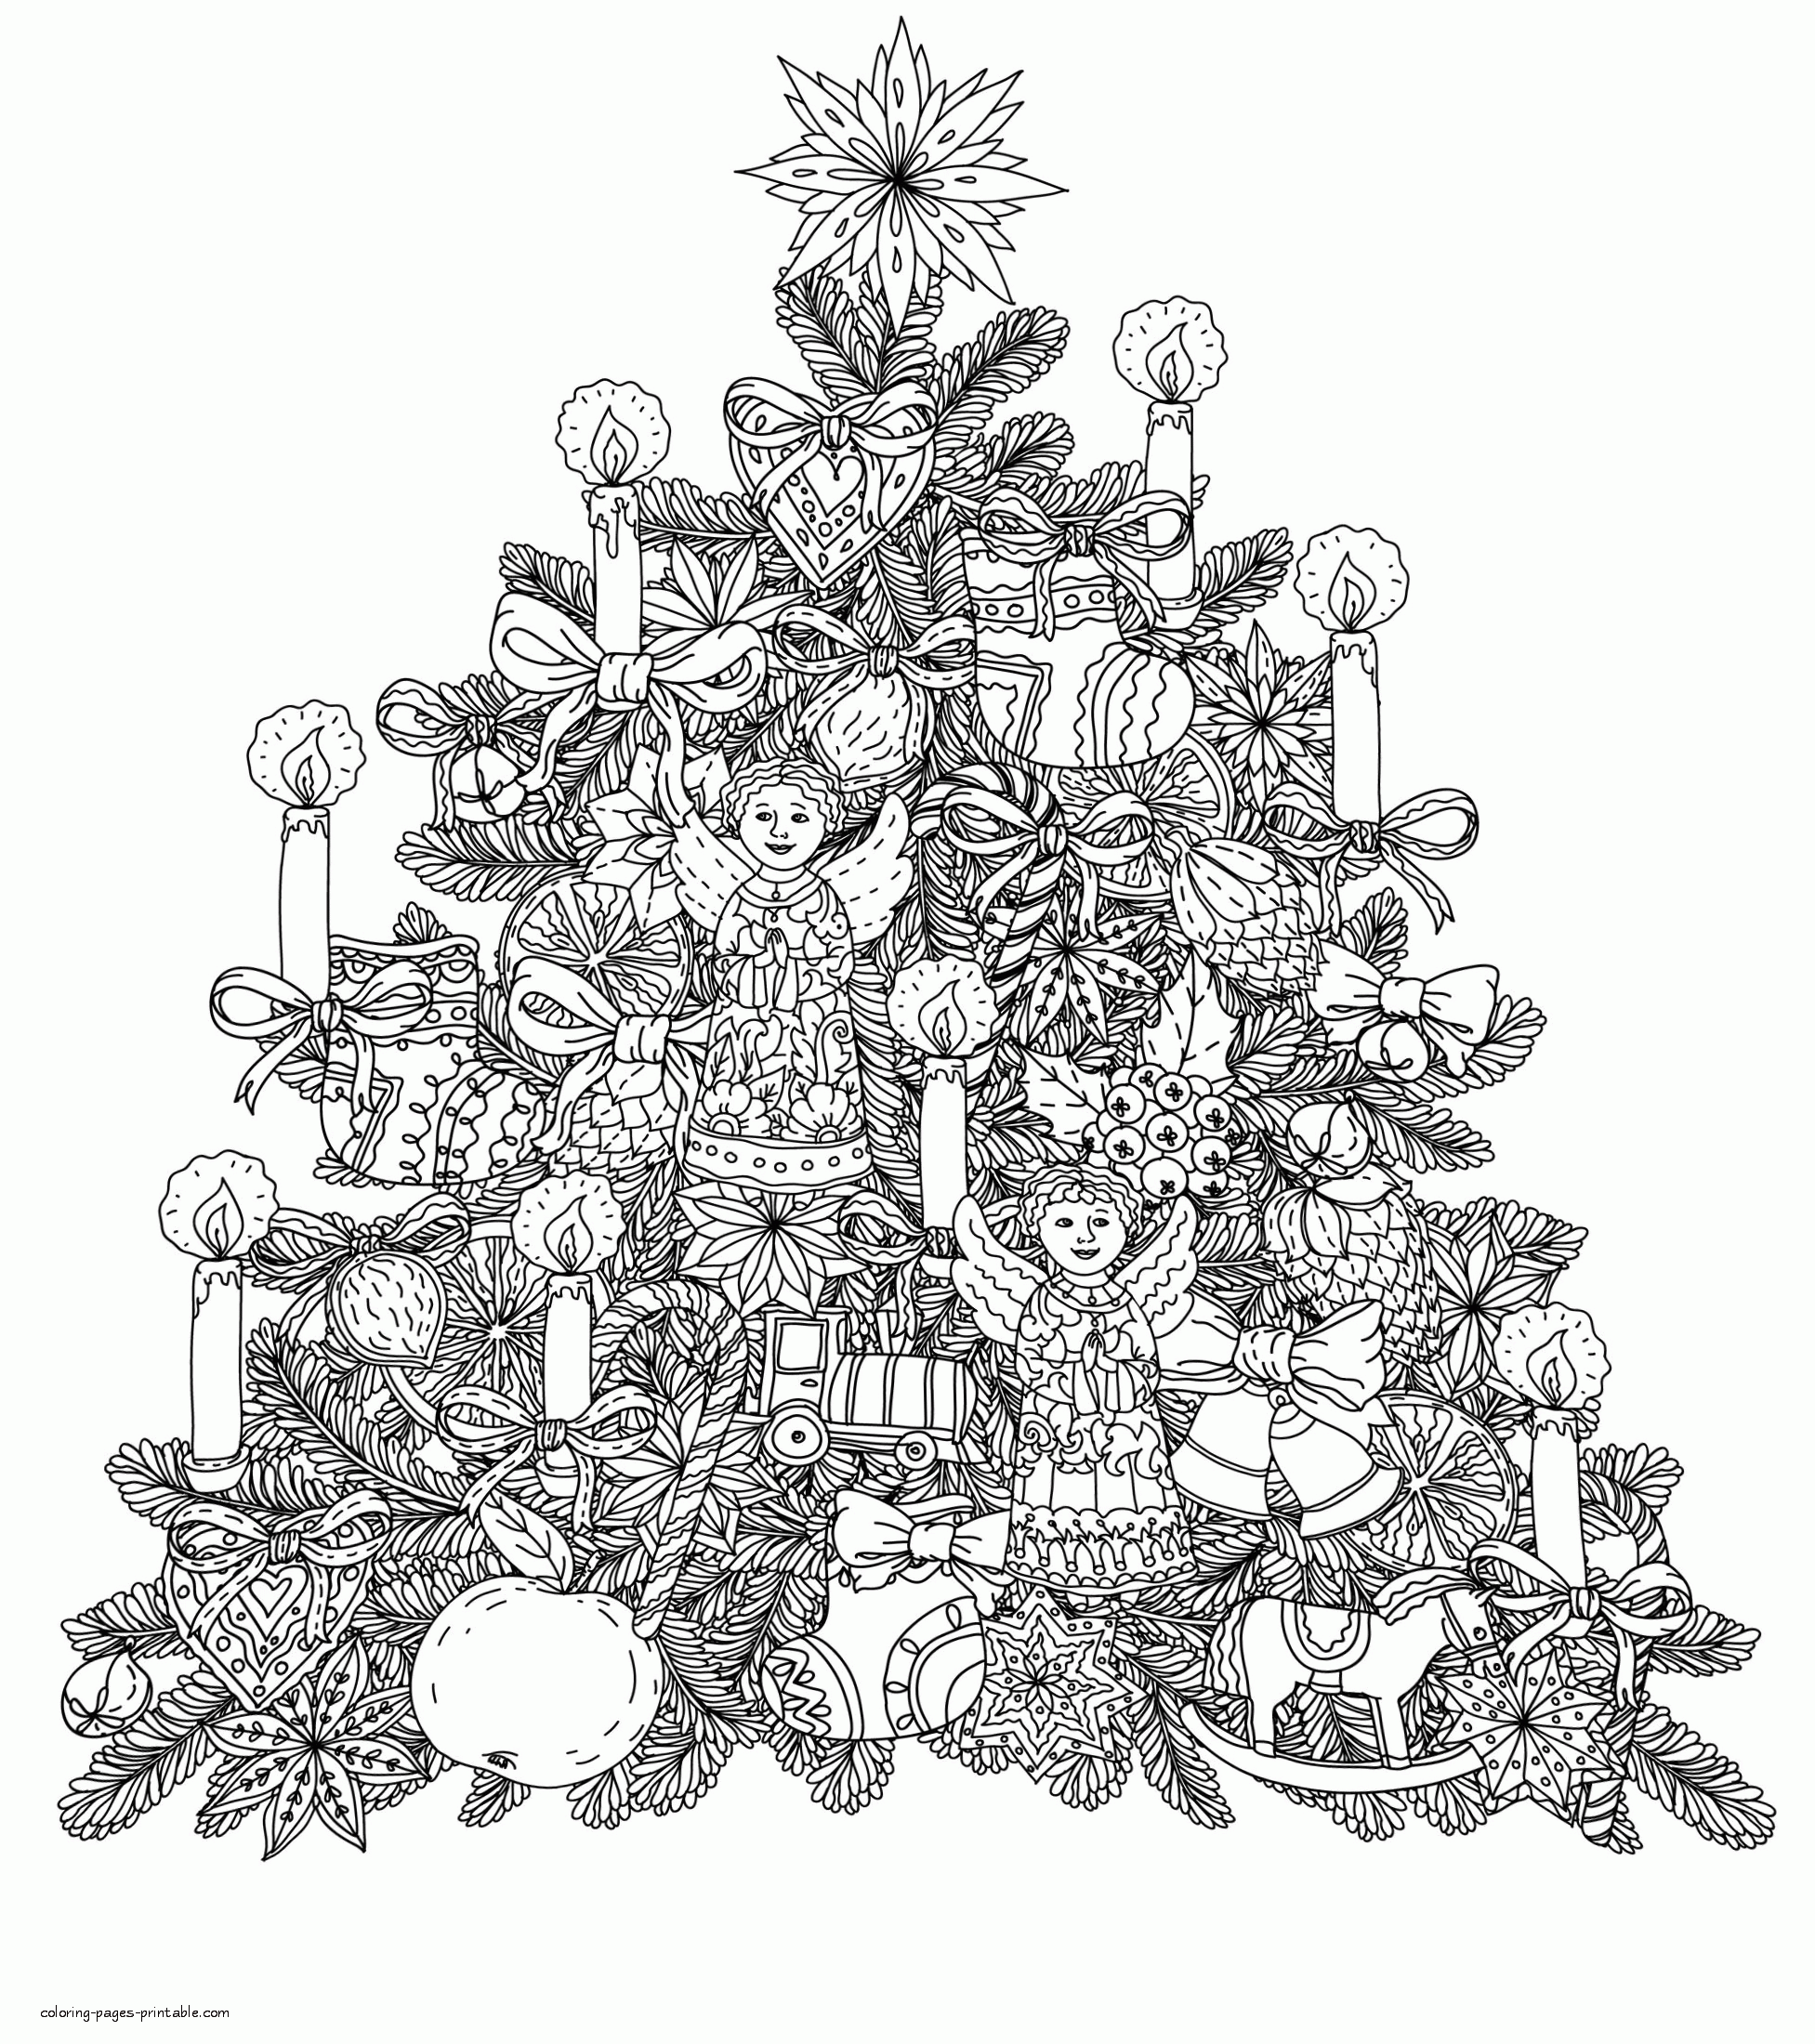 Printable Christmas Tree Coloring Pages For Adults COLORING PAGES PRINTABLE COM